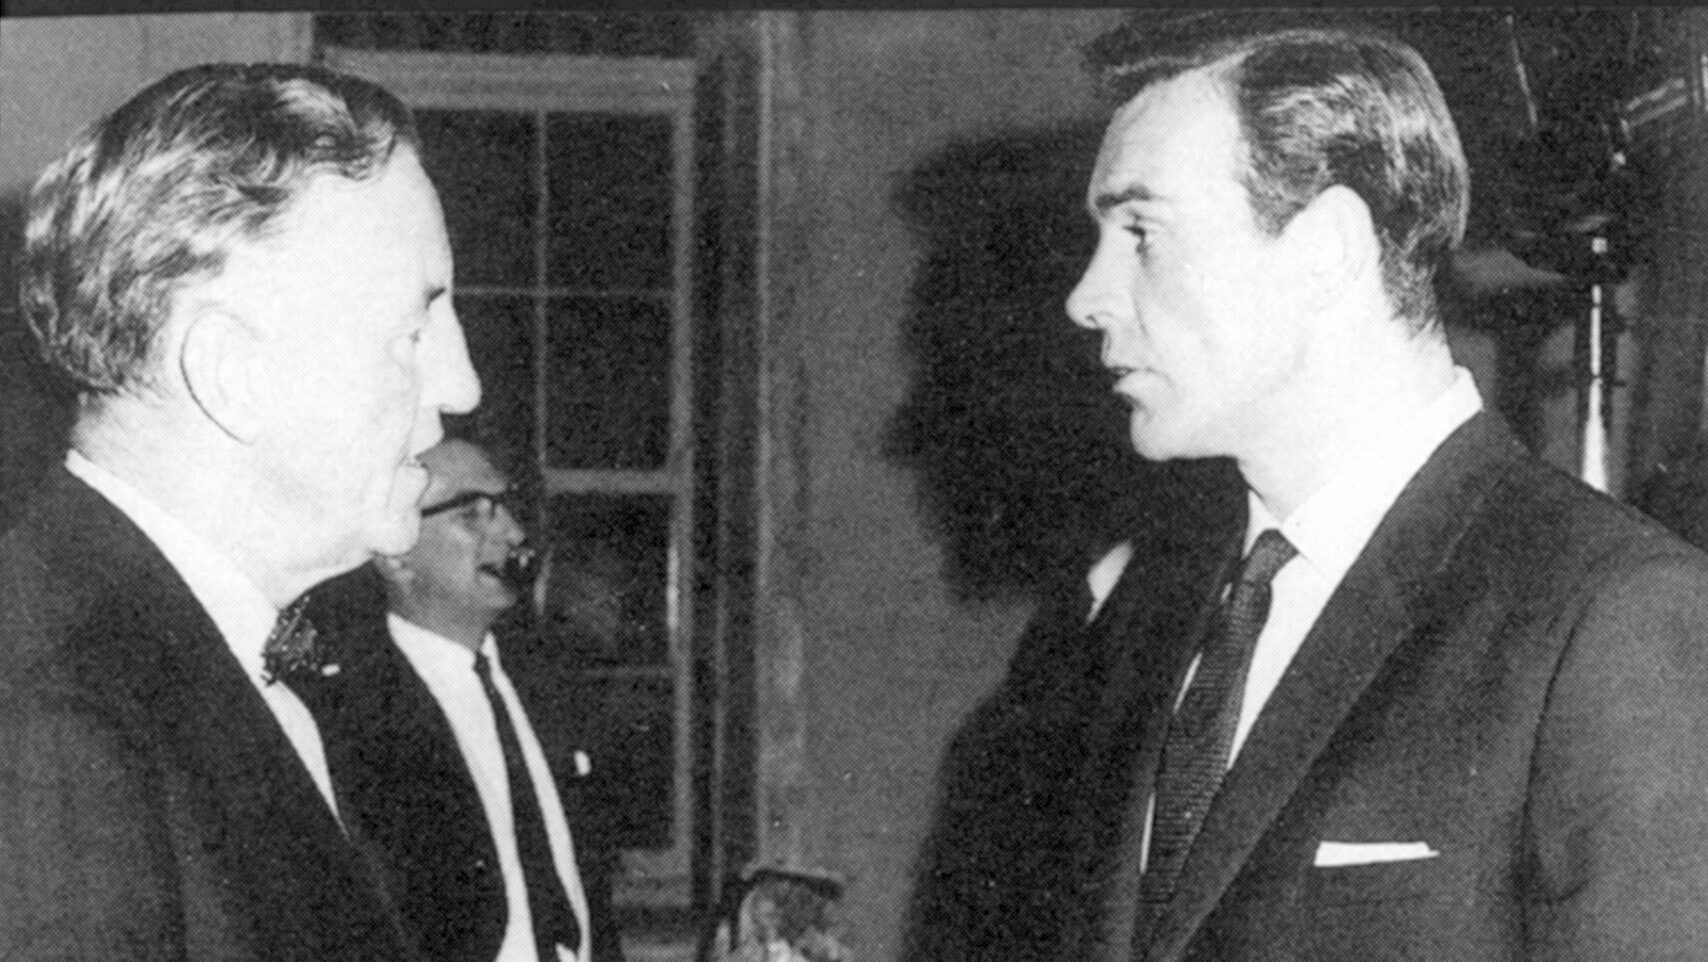 Fleming with the first movie James Bond, Sean Connery.